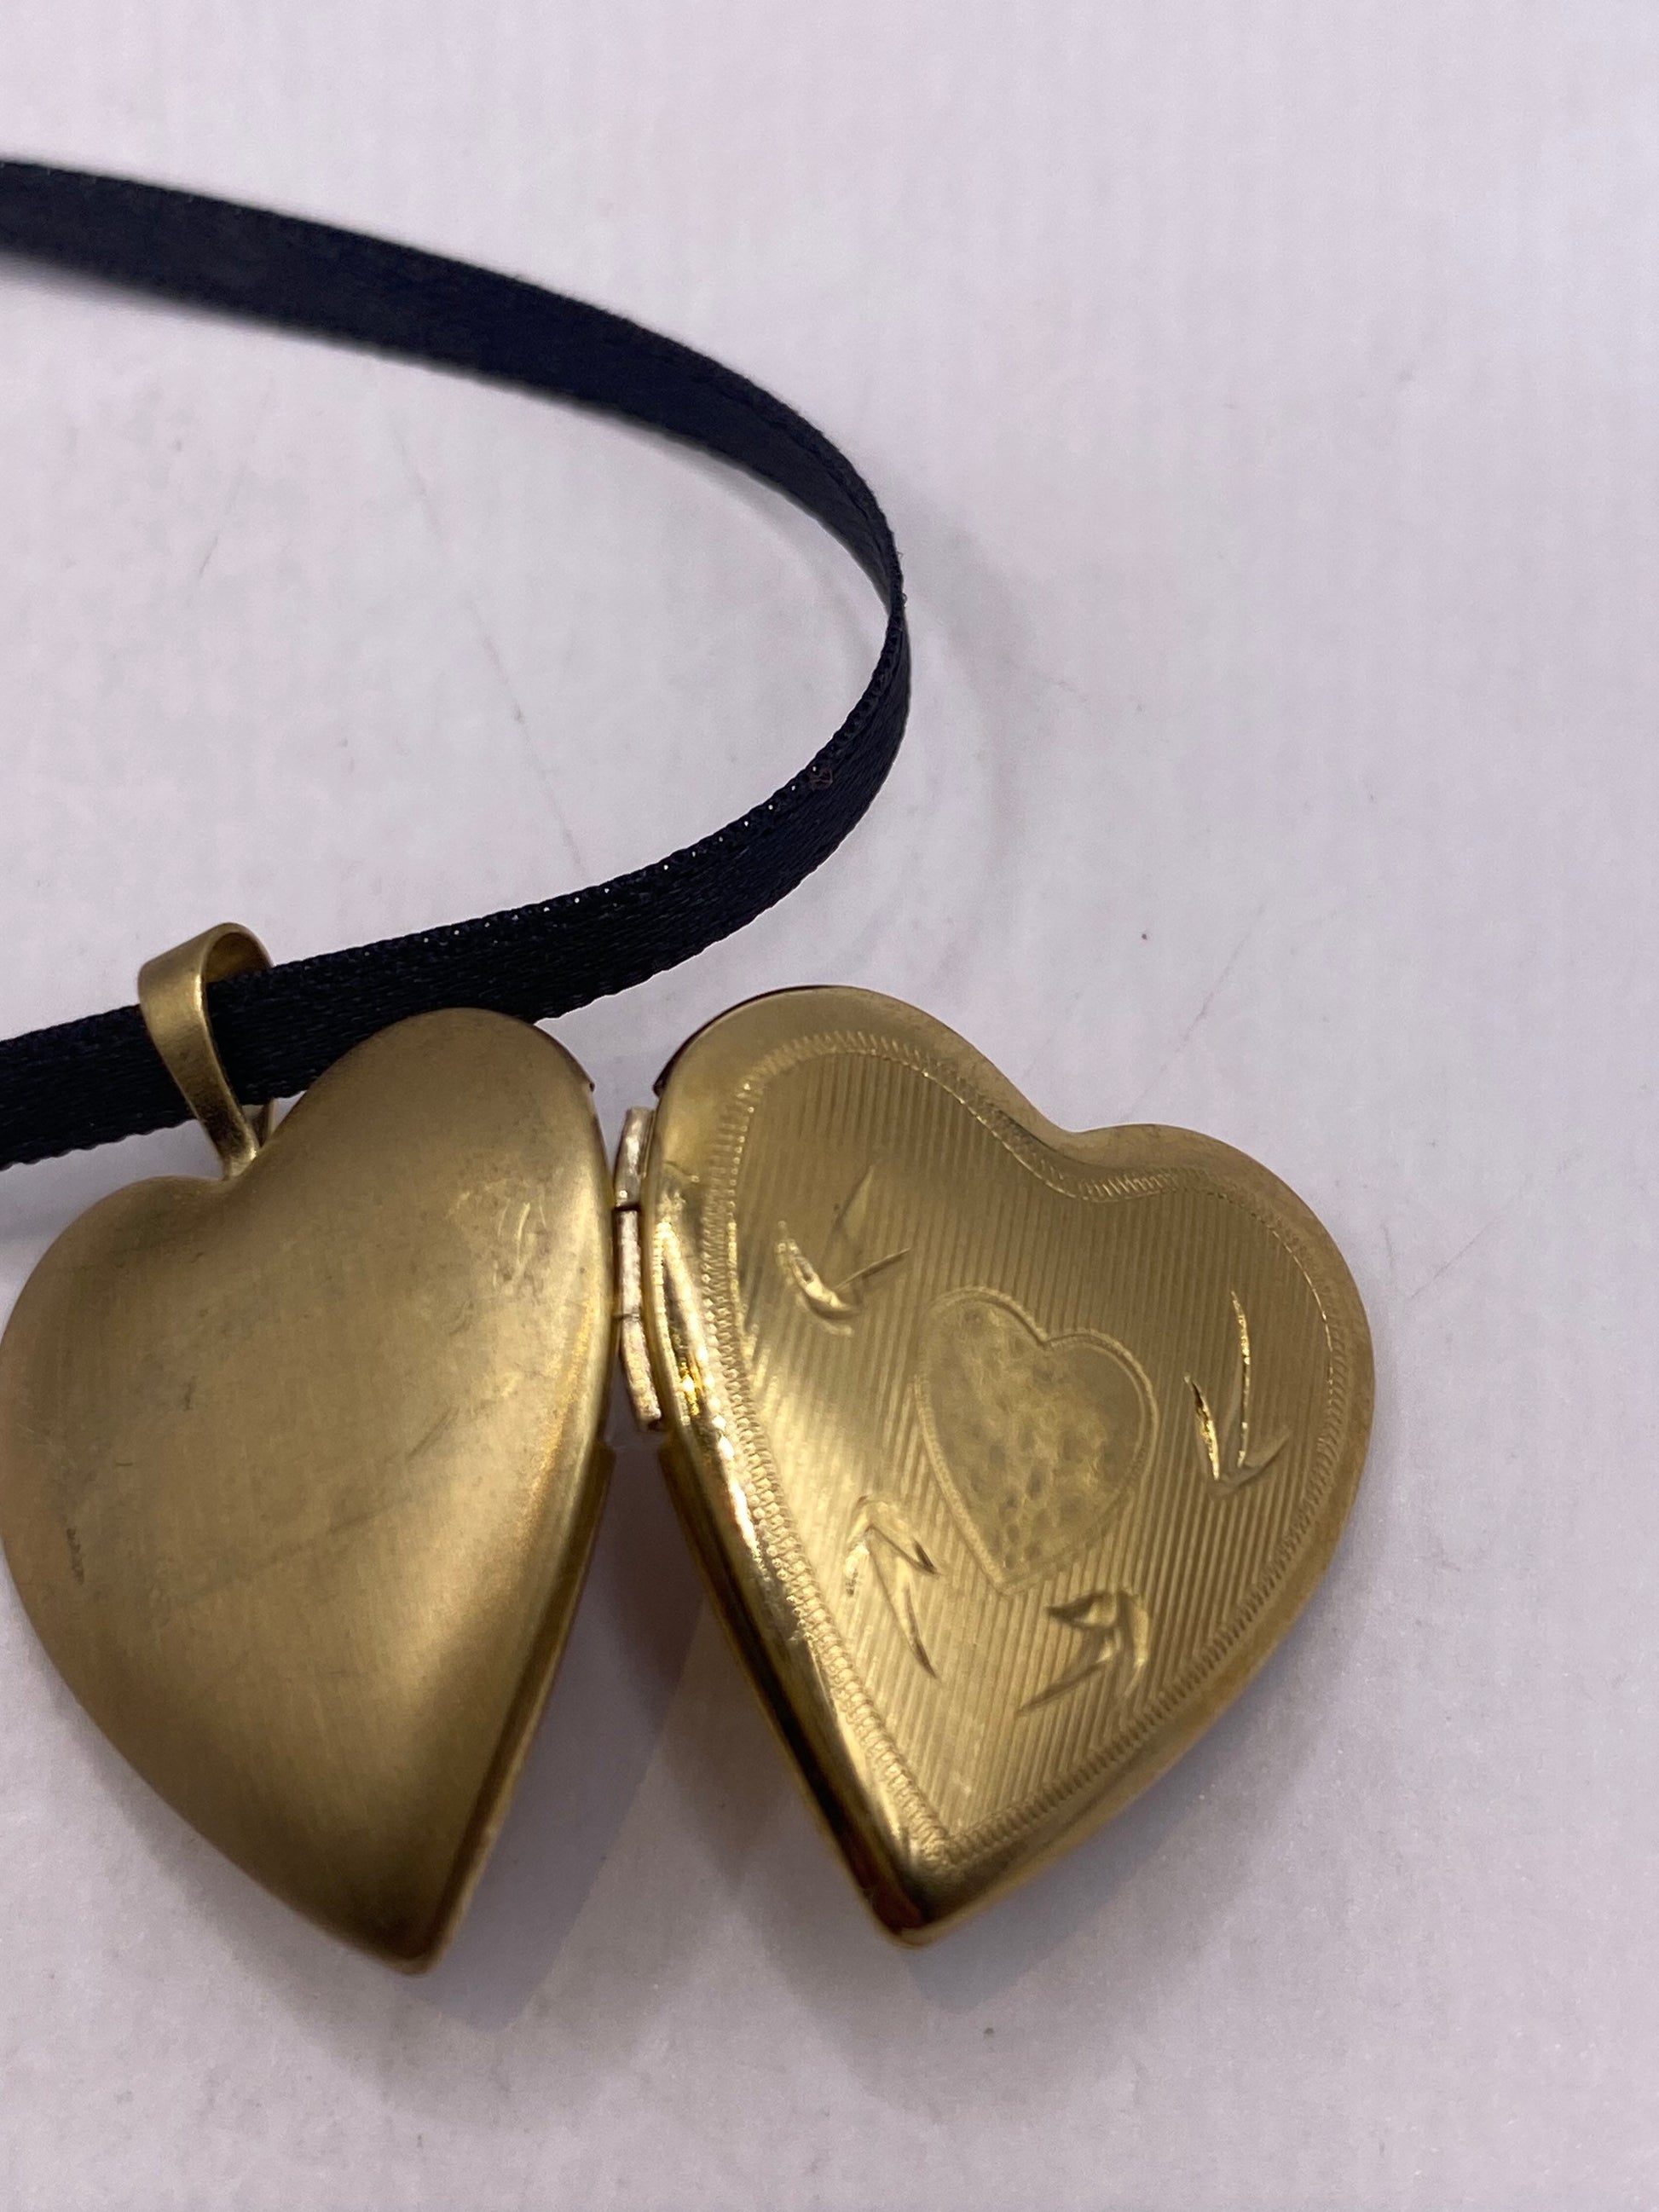 Vintage Gold Locket | Tiny Heart 9k Gold Filled Pendant Photo Memory Charm Engraved Arrows Hearts | Choker Necklace